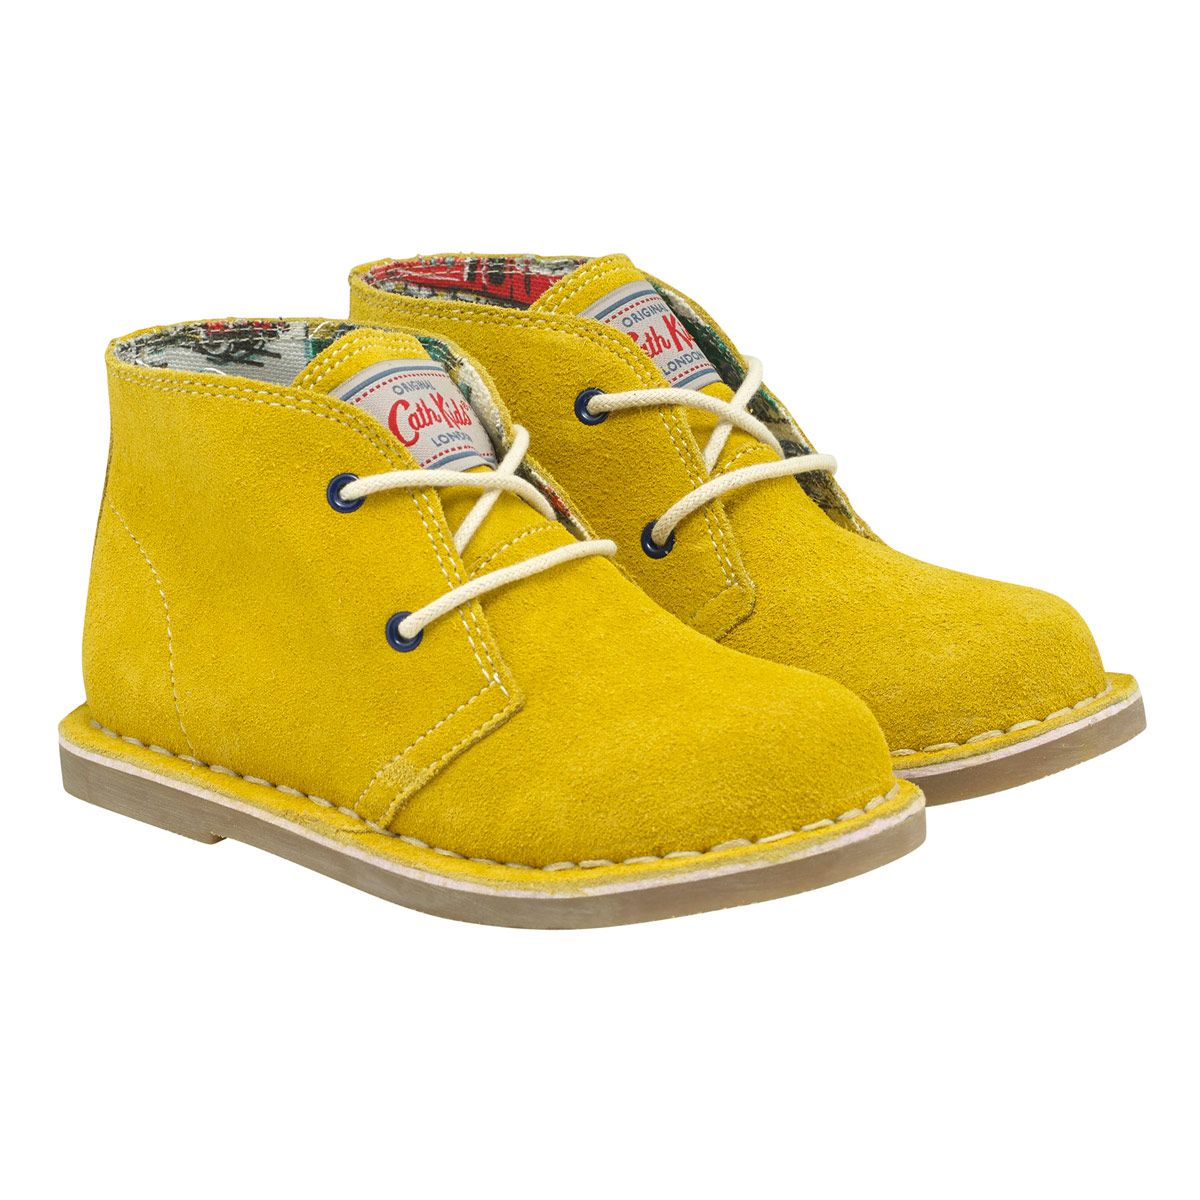 Cath Kidston Boys/Girls Yellow Desert Boots - Stockpoint Apparel Outlet